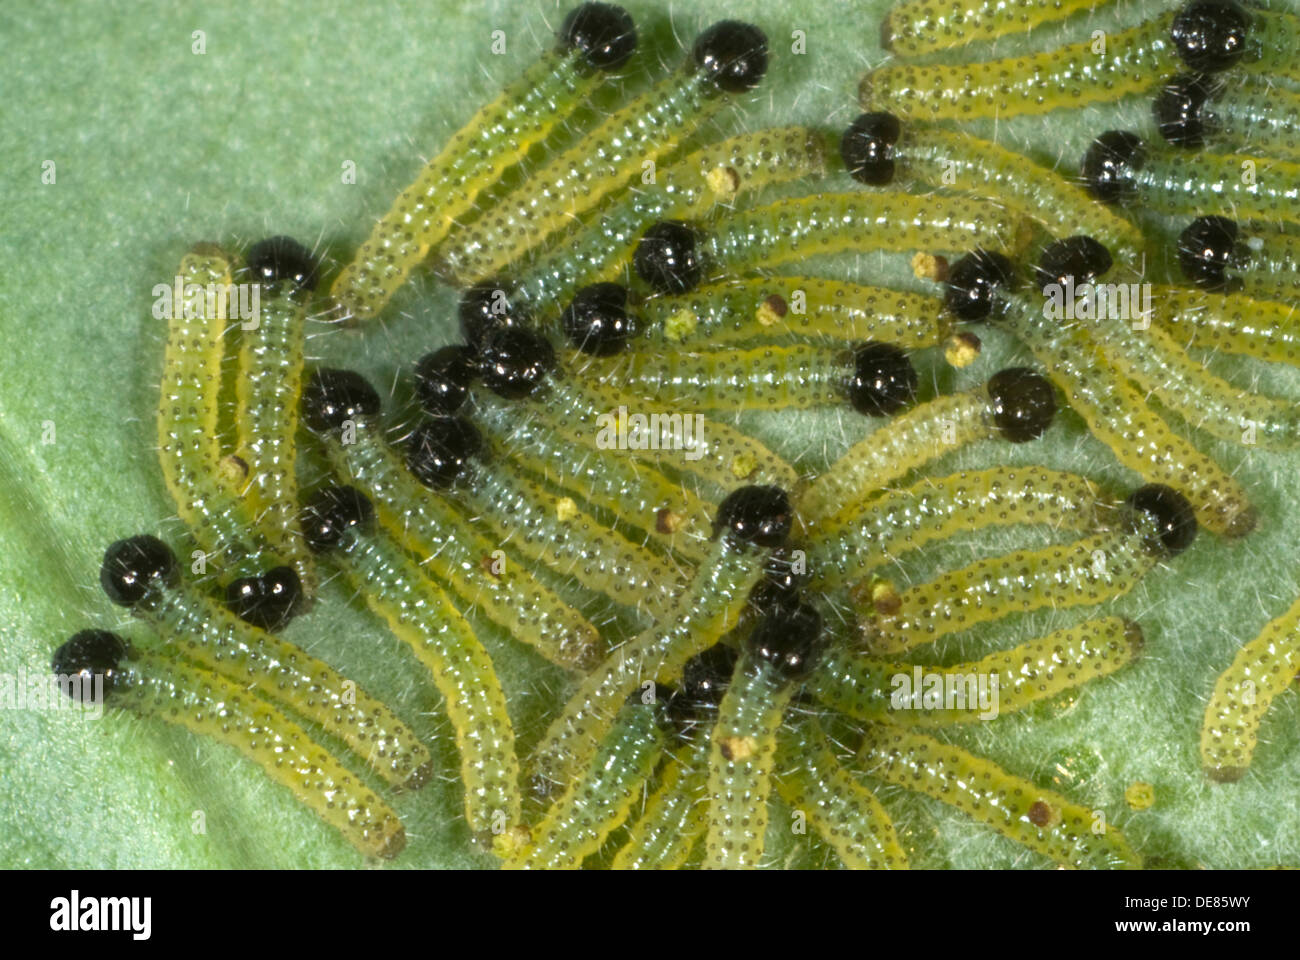 large or cabbage white butterfly, Pieris brassicae, neonate caterpillars feeding on a cabbage leaf Stock Photo